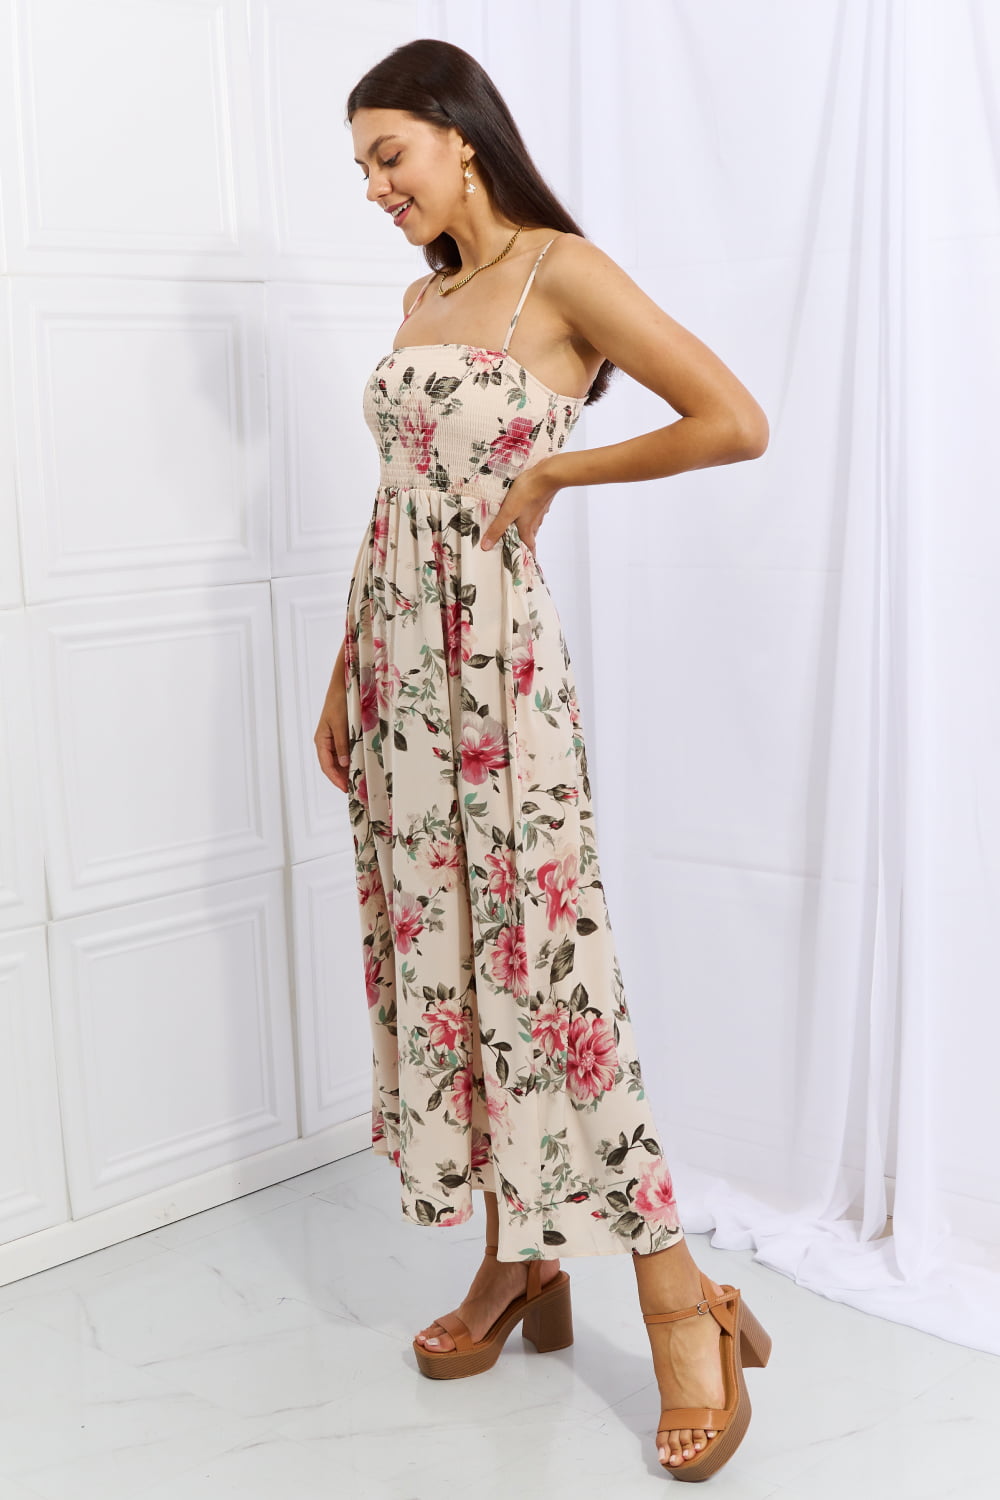 Hold Me Tight Sleeveless Floral Maxi Dress in Pink for Women | Maxi Dresses | Ro + Ivy